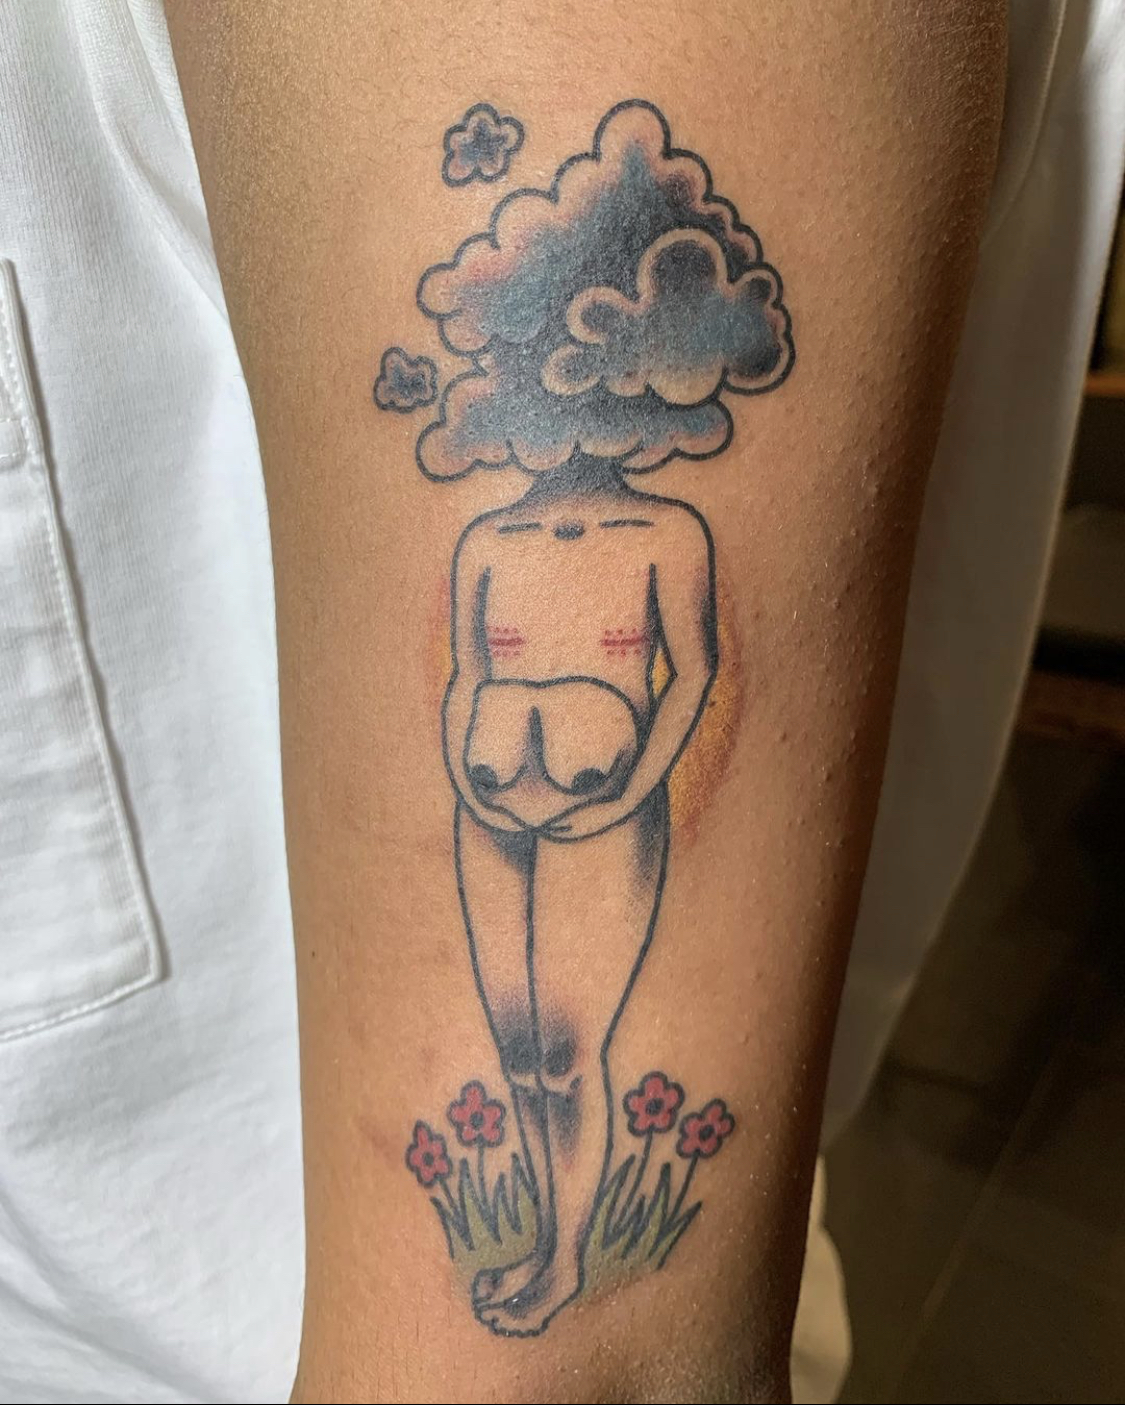 A body with a cloud head and top surgery scars holds their former breasts, while standing on flowers.